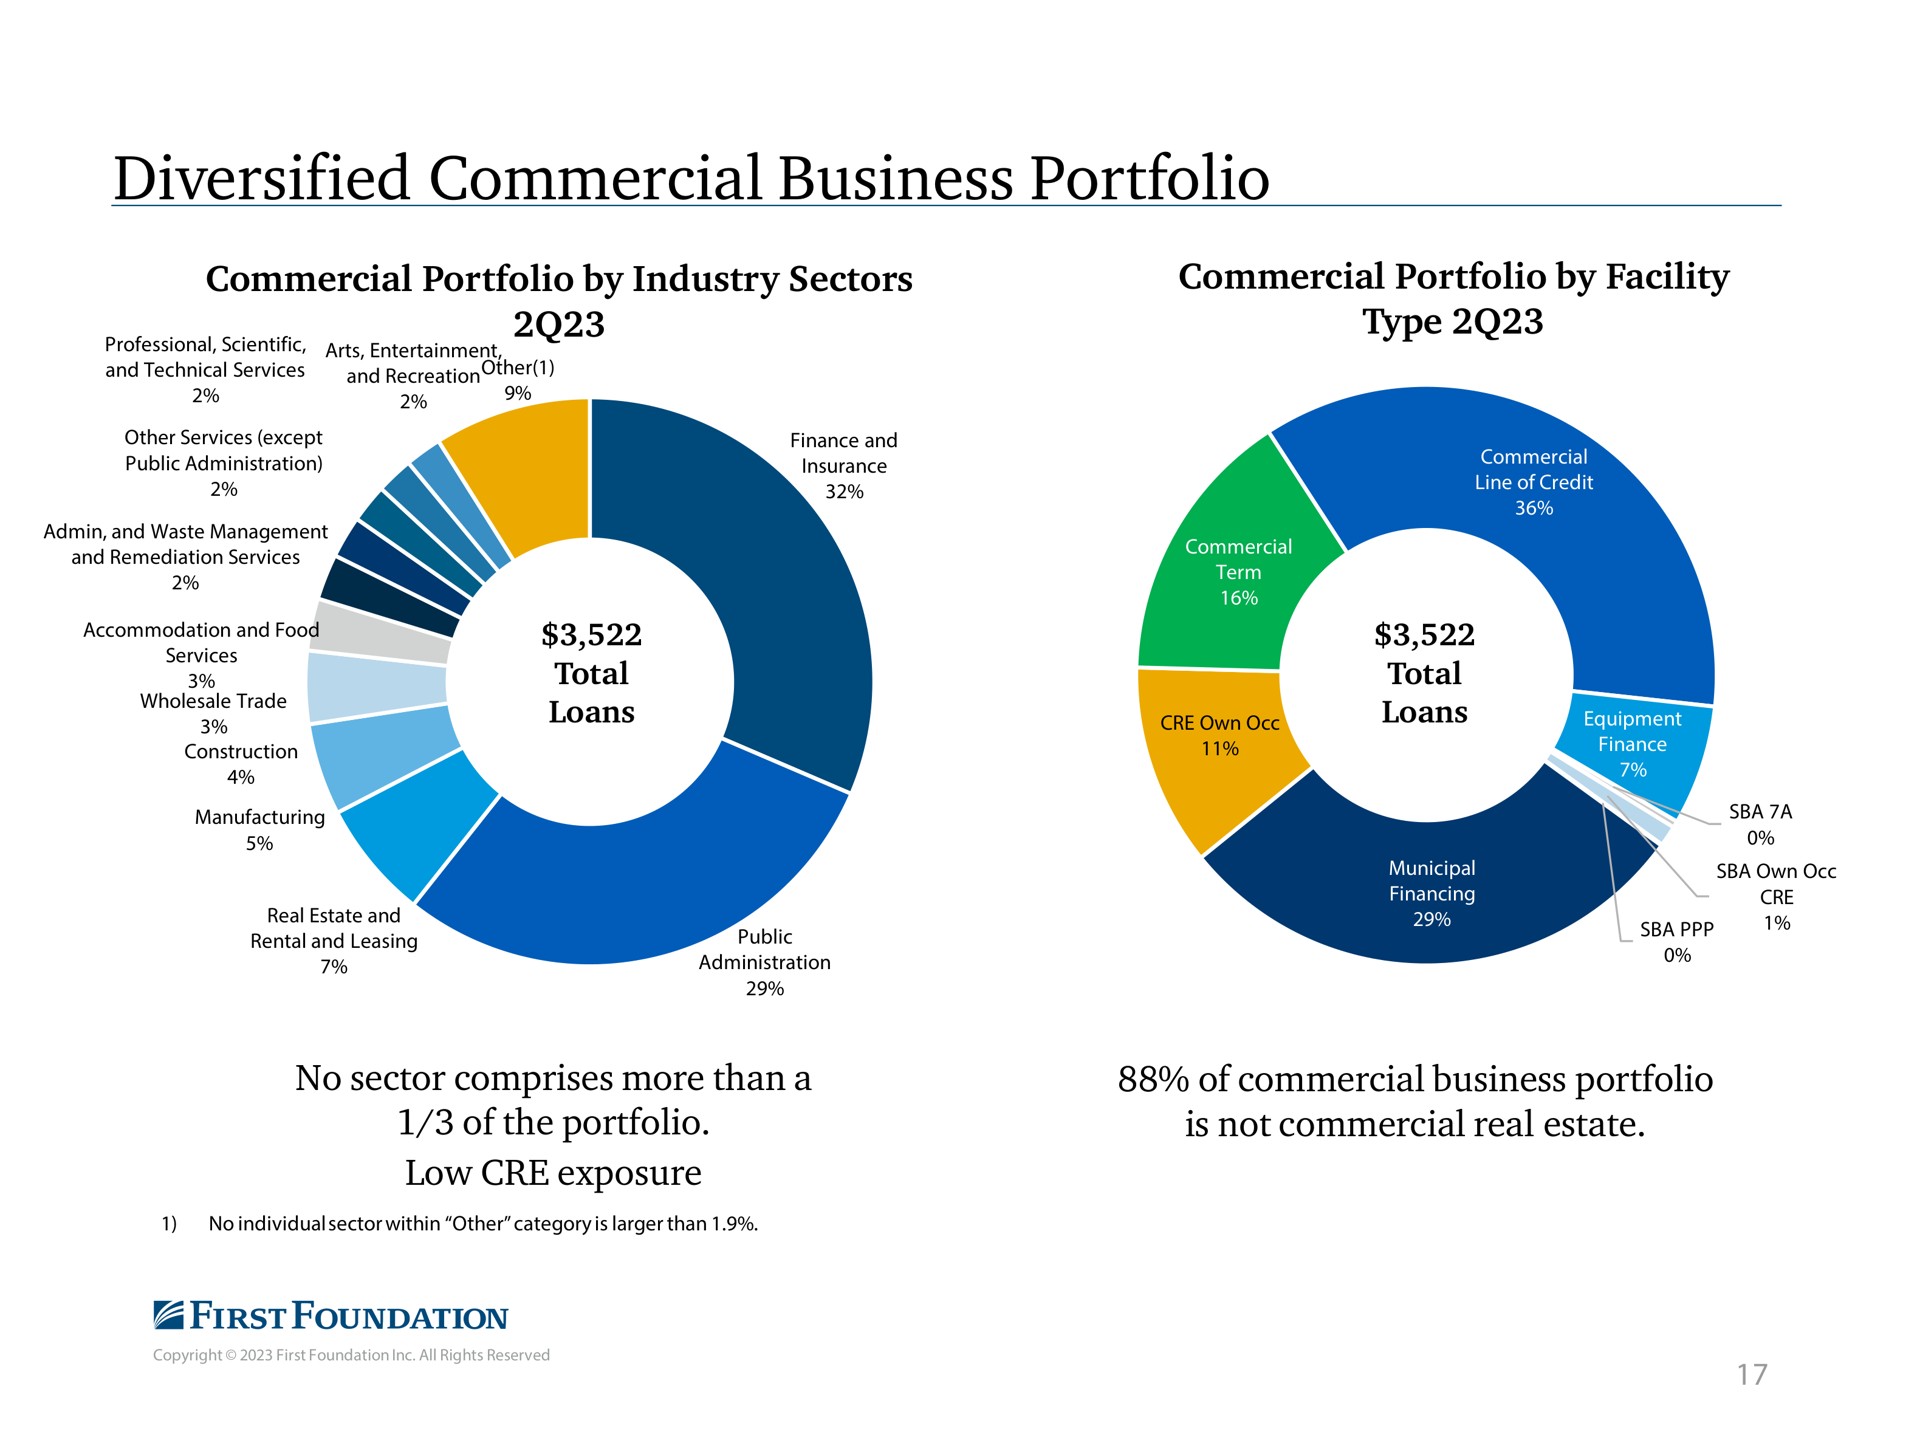 diversified commercial business portfolio commercial portfolio by industry sectors commercial portfolio by facility type no sector comprises more than a of the portfolio low exposure of commercial business portfolio is not commercial real estate | First Foundation